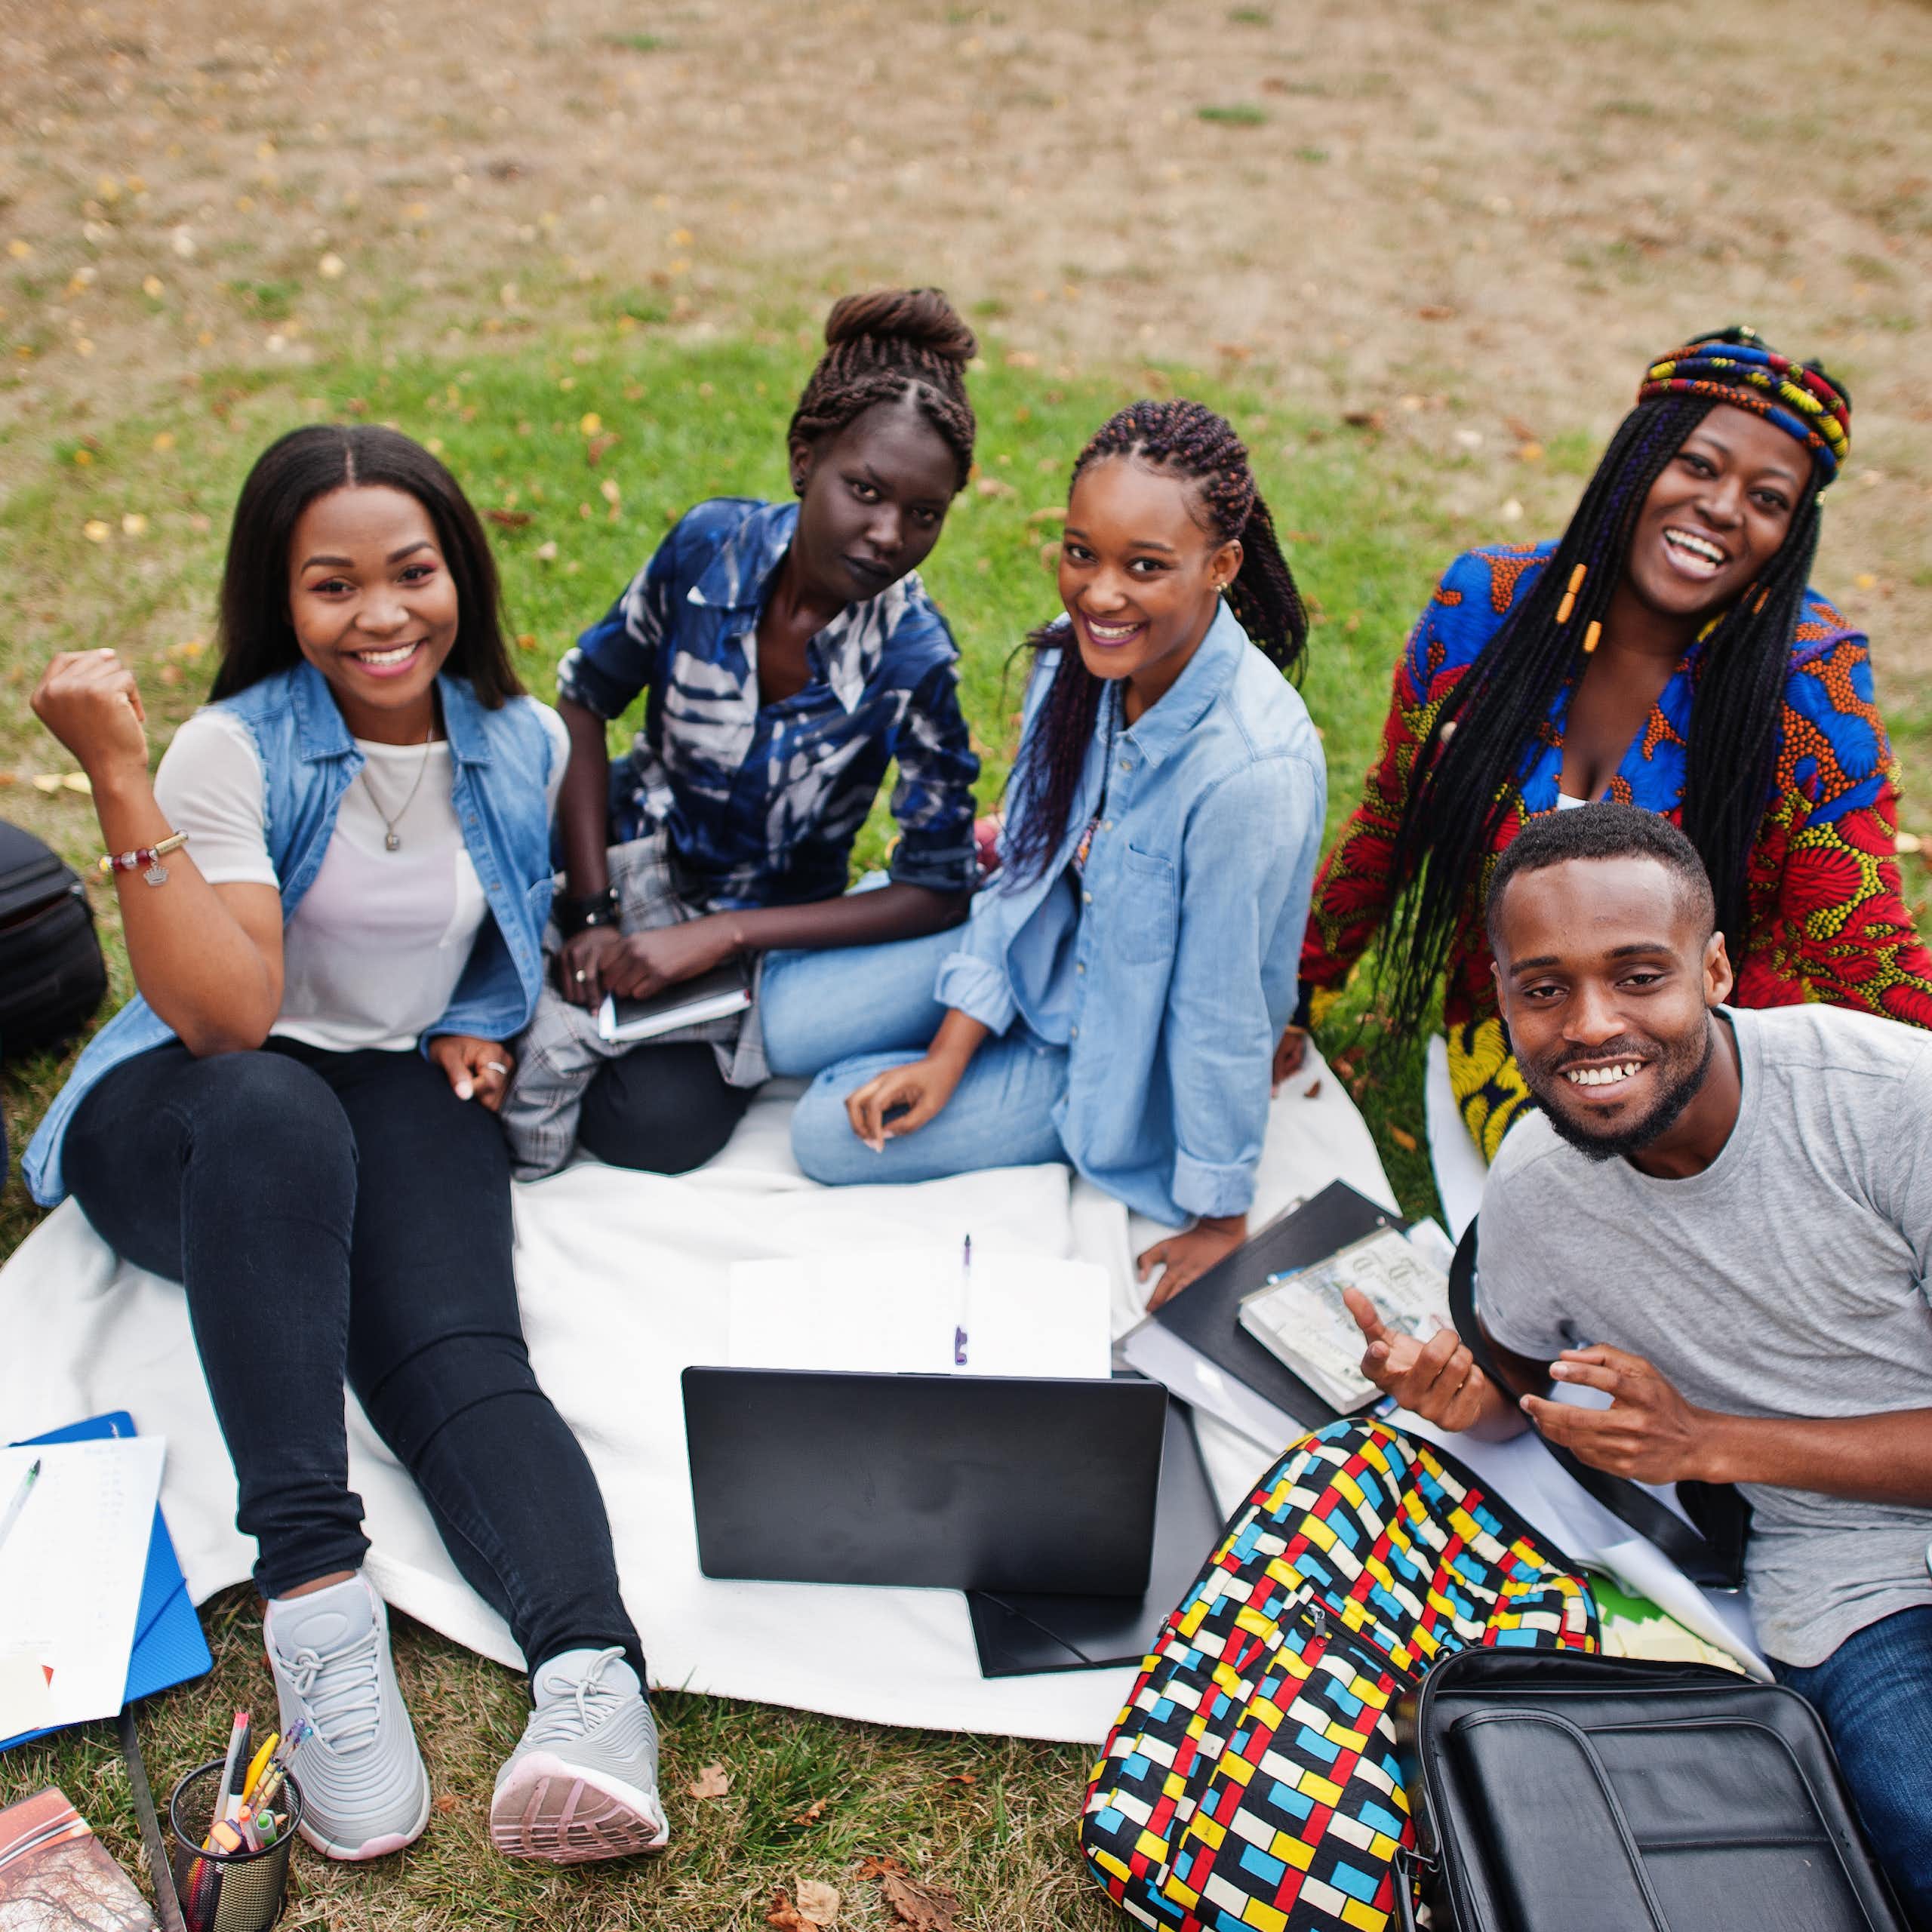 A group of Black students with laptops and knapsacks sitting outdoors.